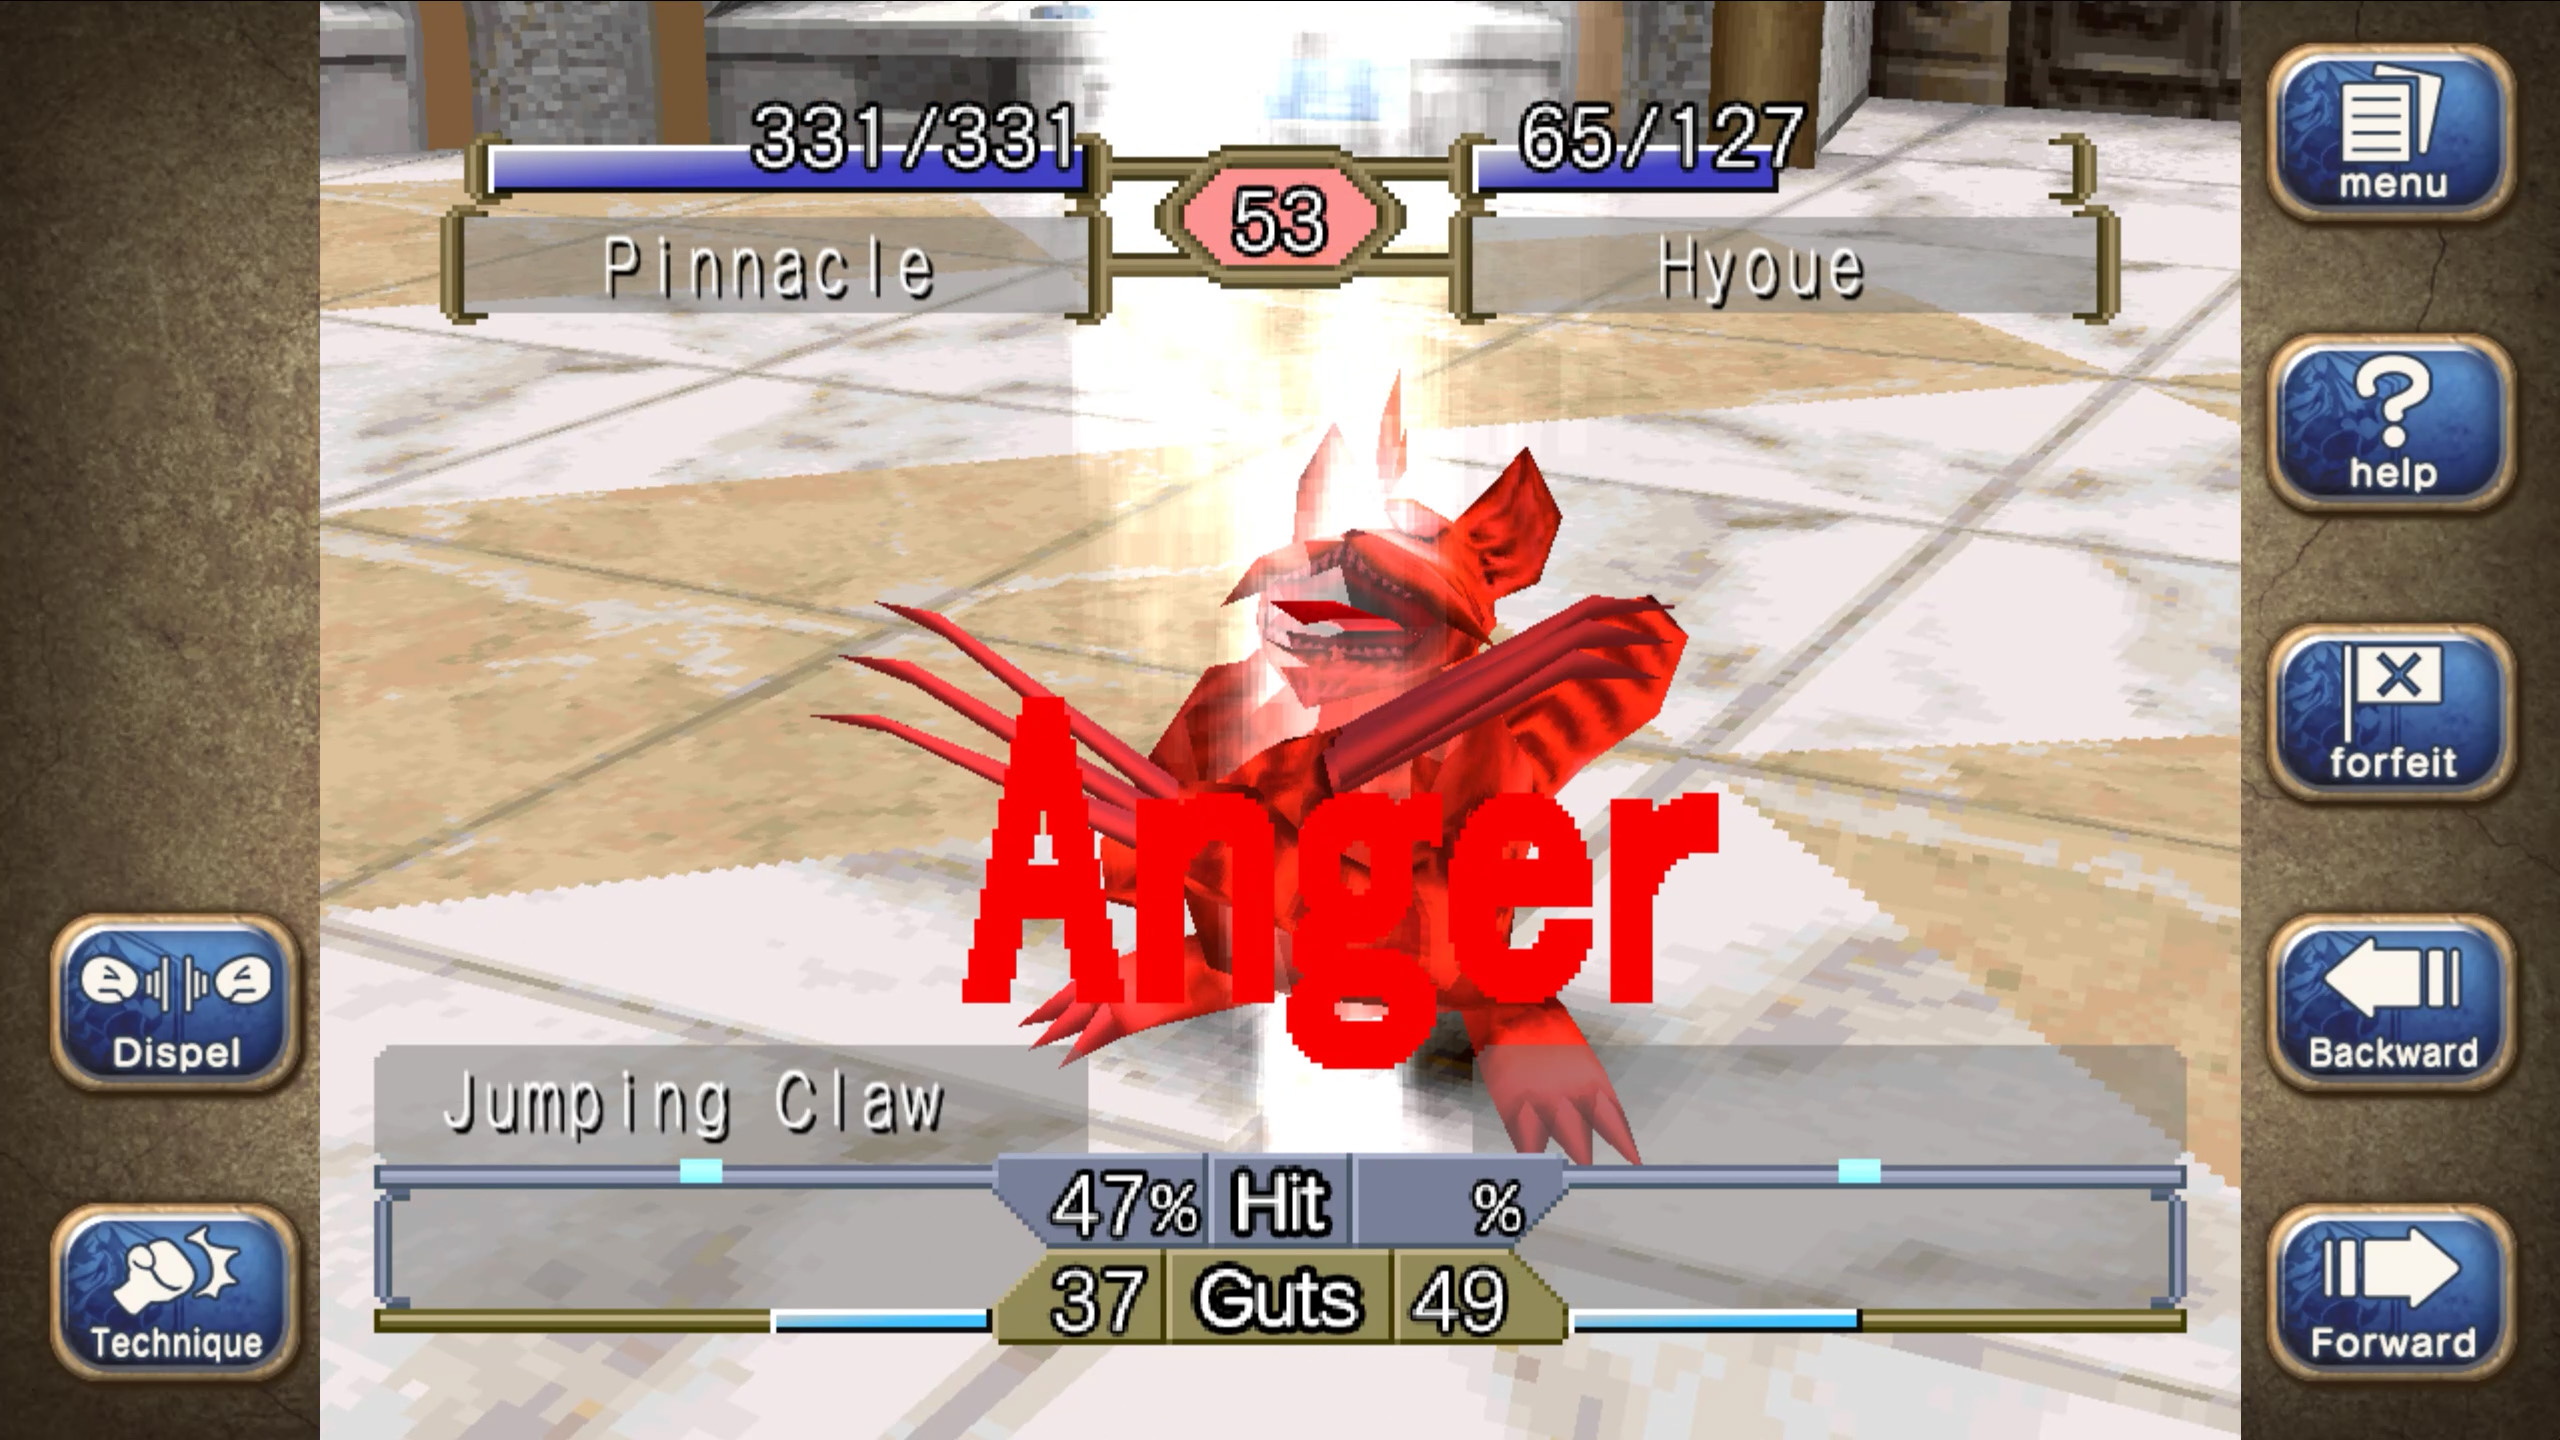 A Kato using the Anger battle special.